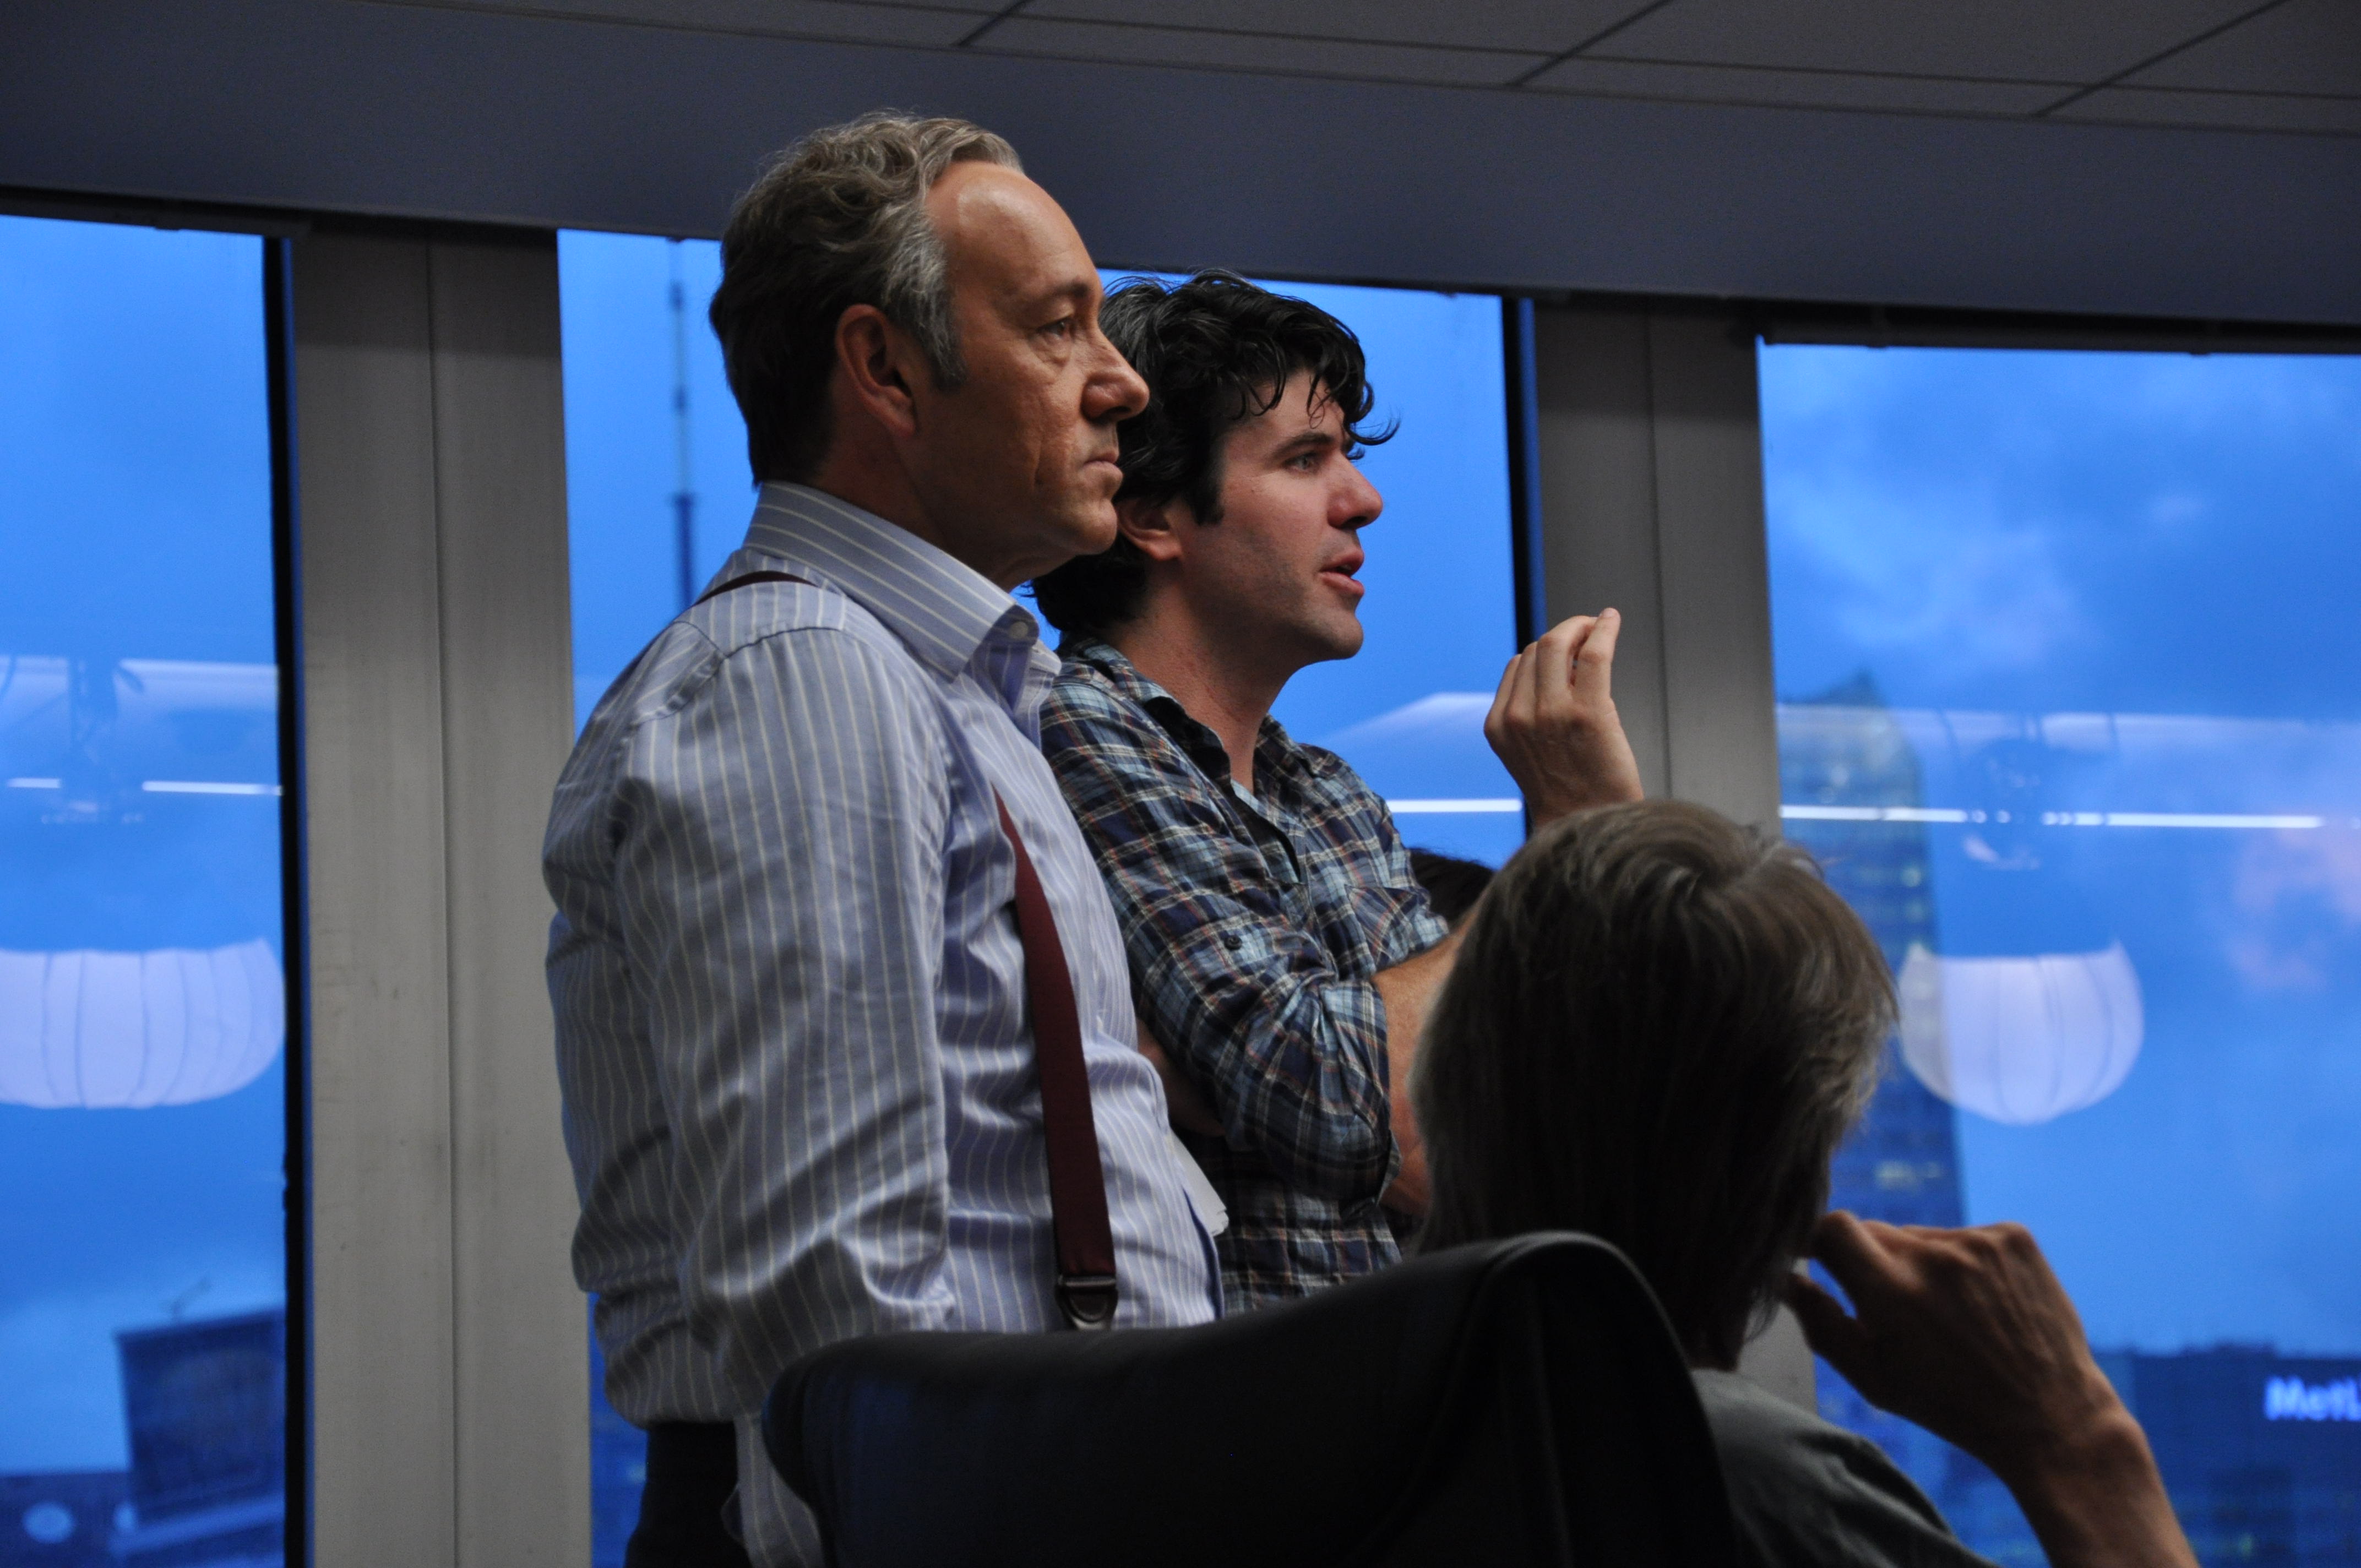 Writer/Director J.C. Chandor on the set of Margin Call with actors Kevin Spacey and Jeremy Irons